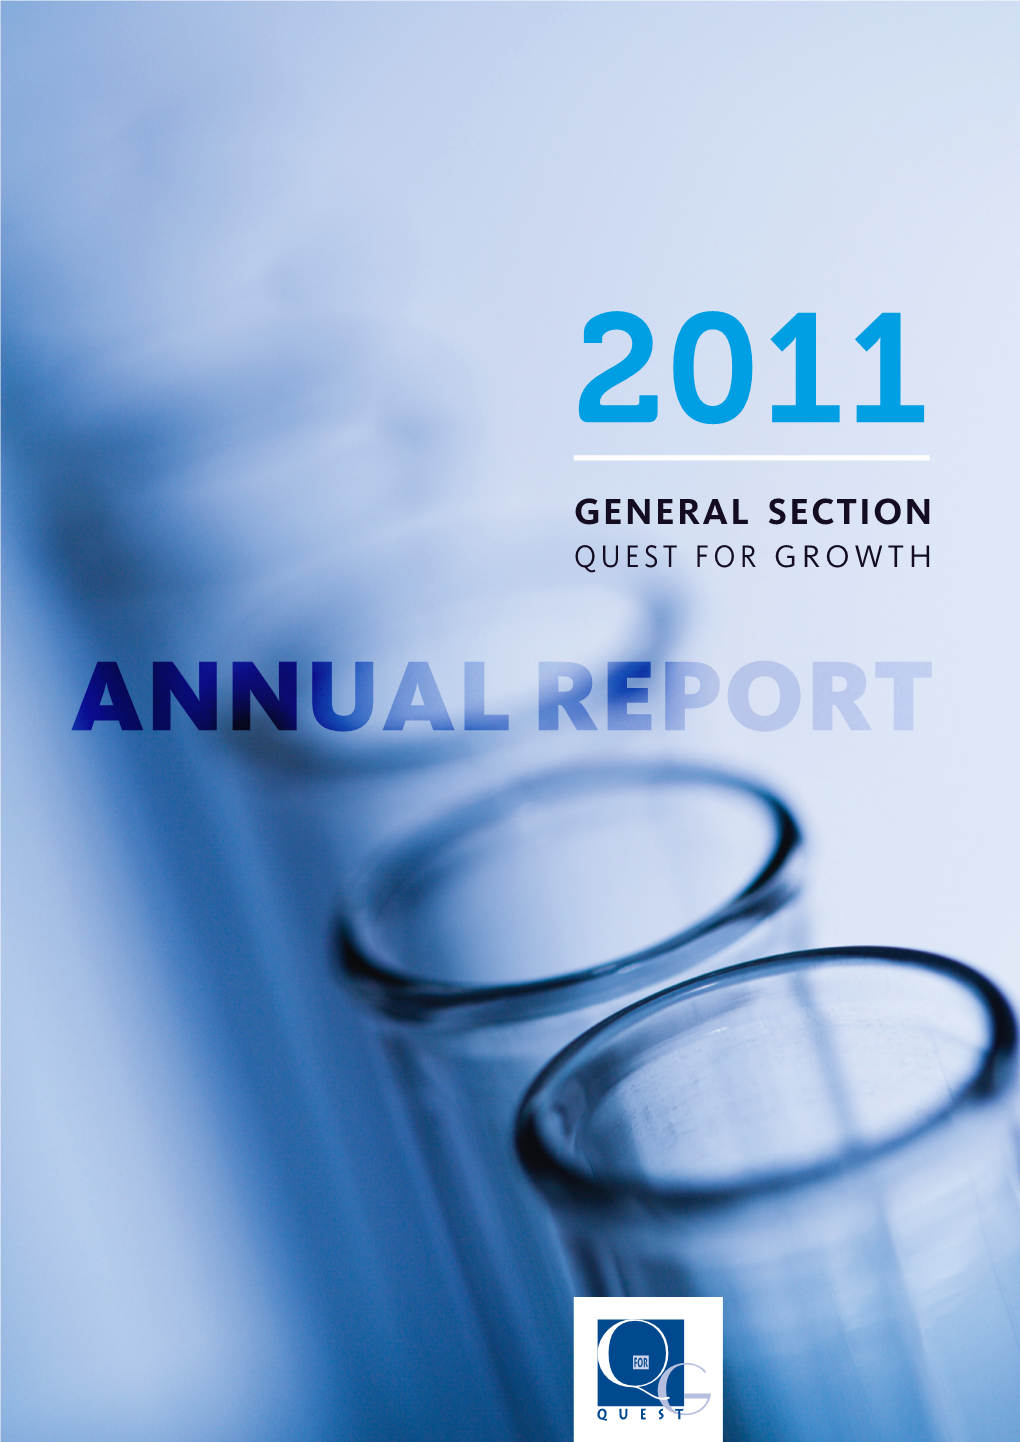 ANNUAL REPORT Contents Annual REPORT General SECTION Quest for Growth